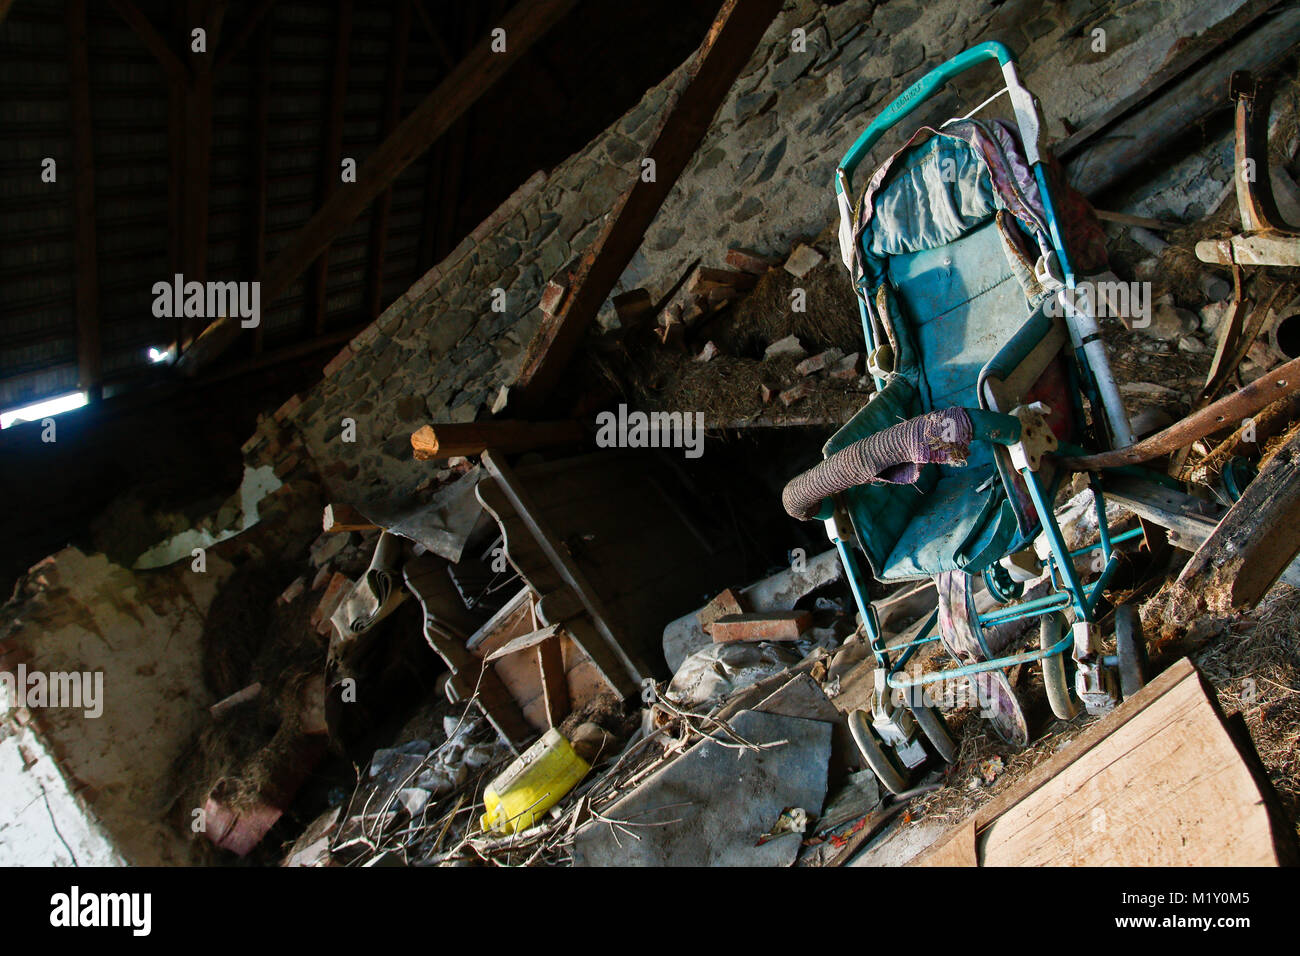 The interior of and old ruin is filled with a mess. An abandoned baby carriage can be seen. Stock Photo